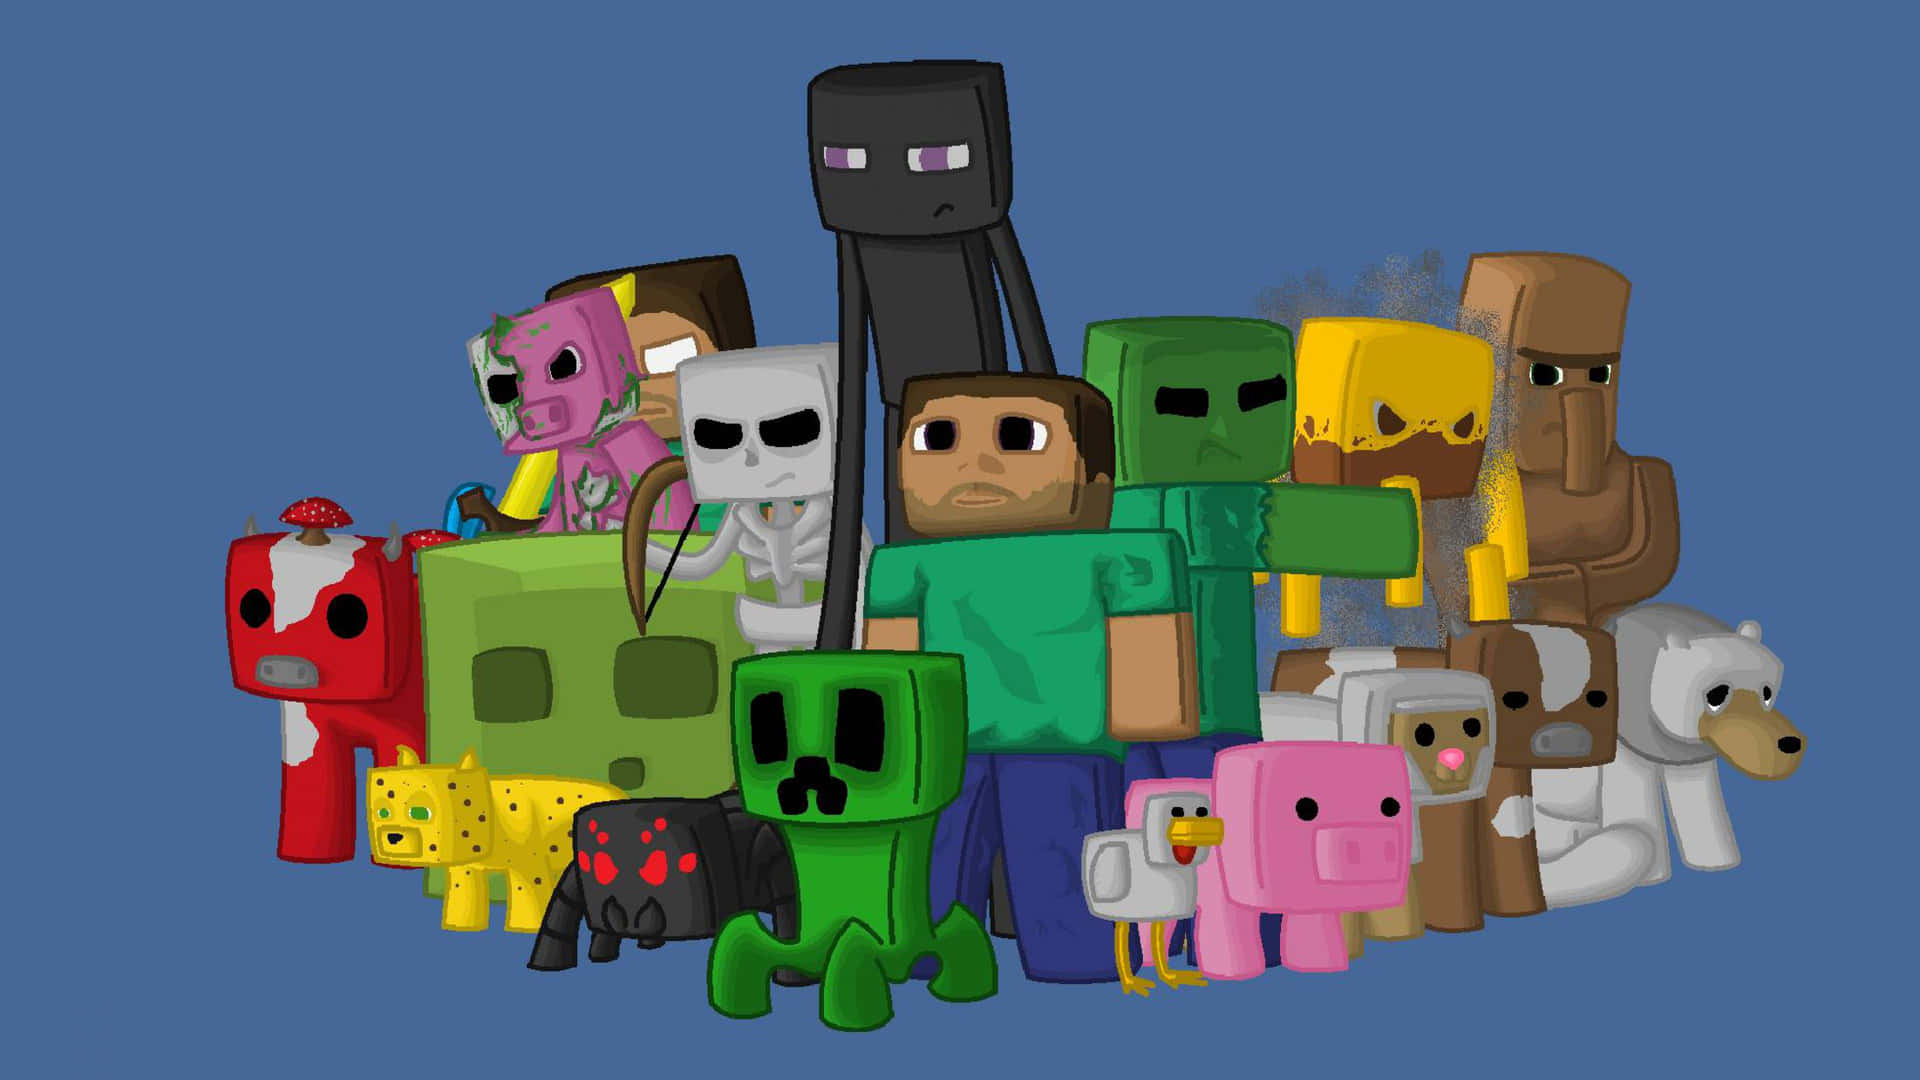 "Minecraft Mobs - The Character of the Game" Wallpaper